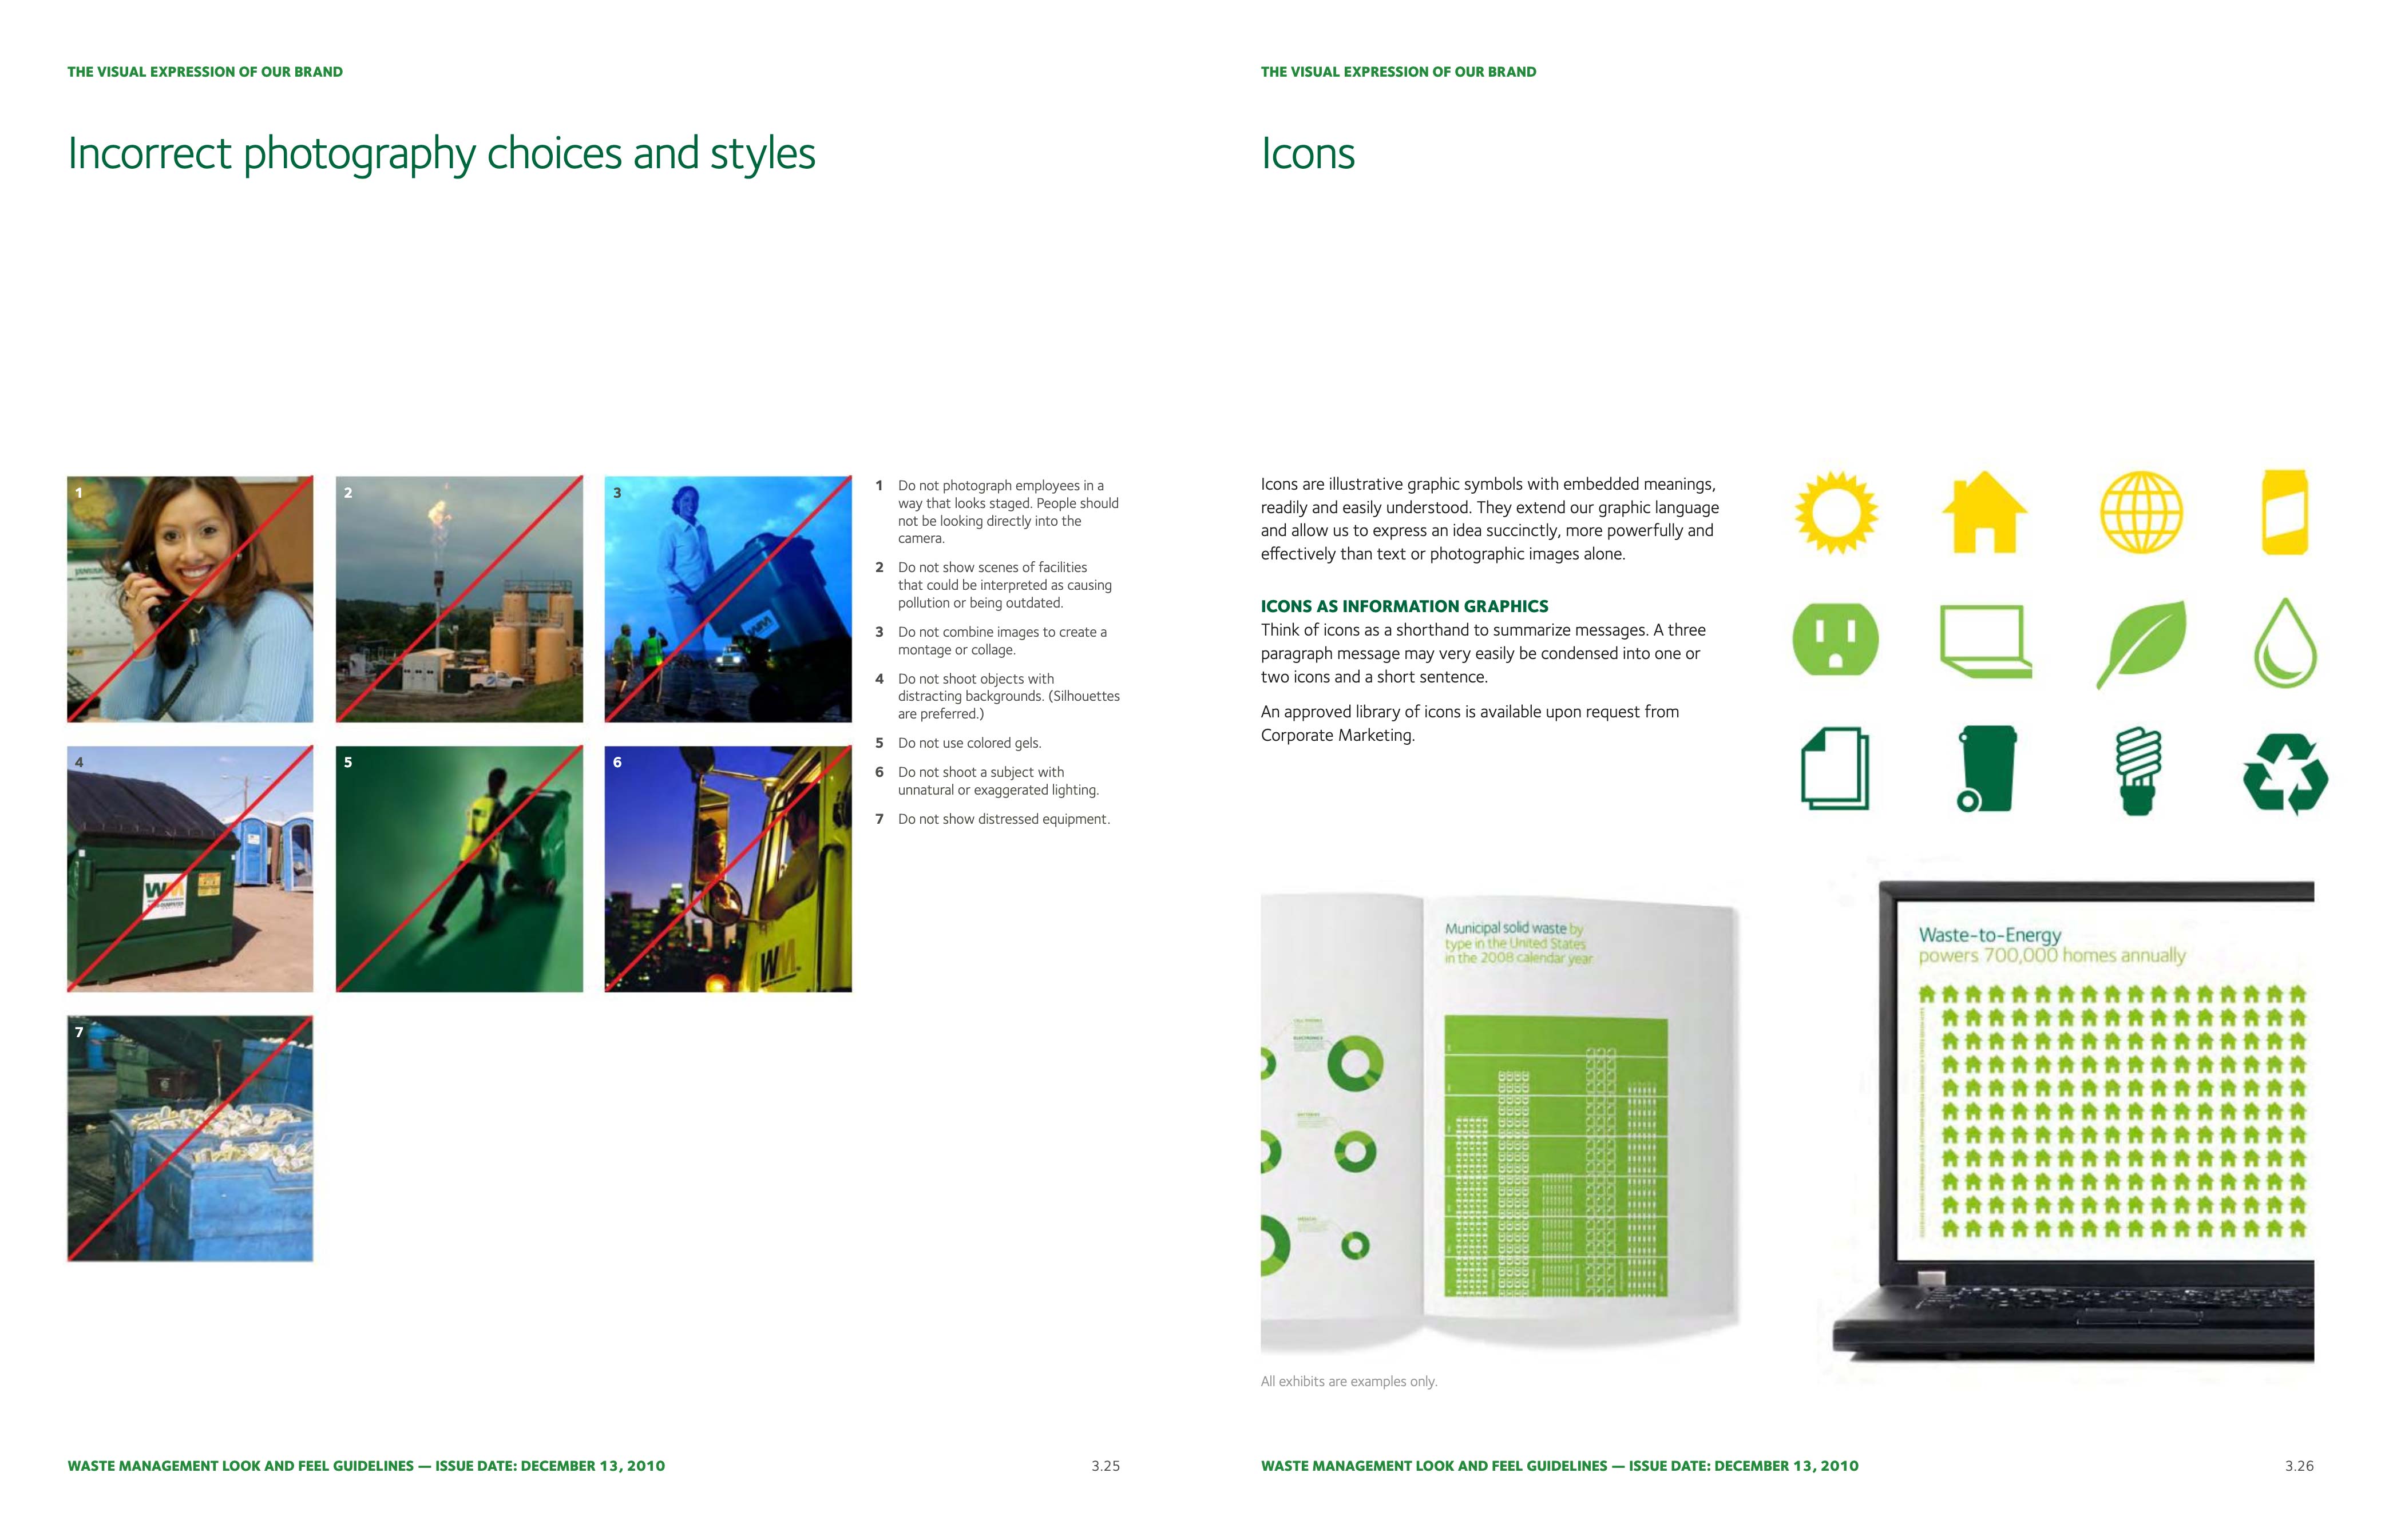 Example 2 - Waste Management Branding Guidelines